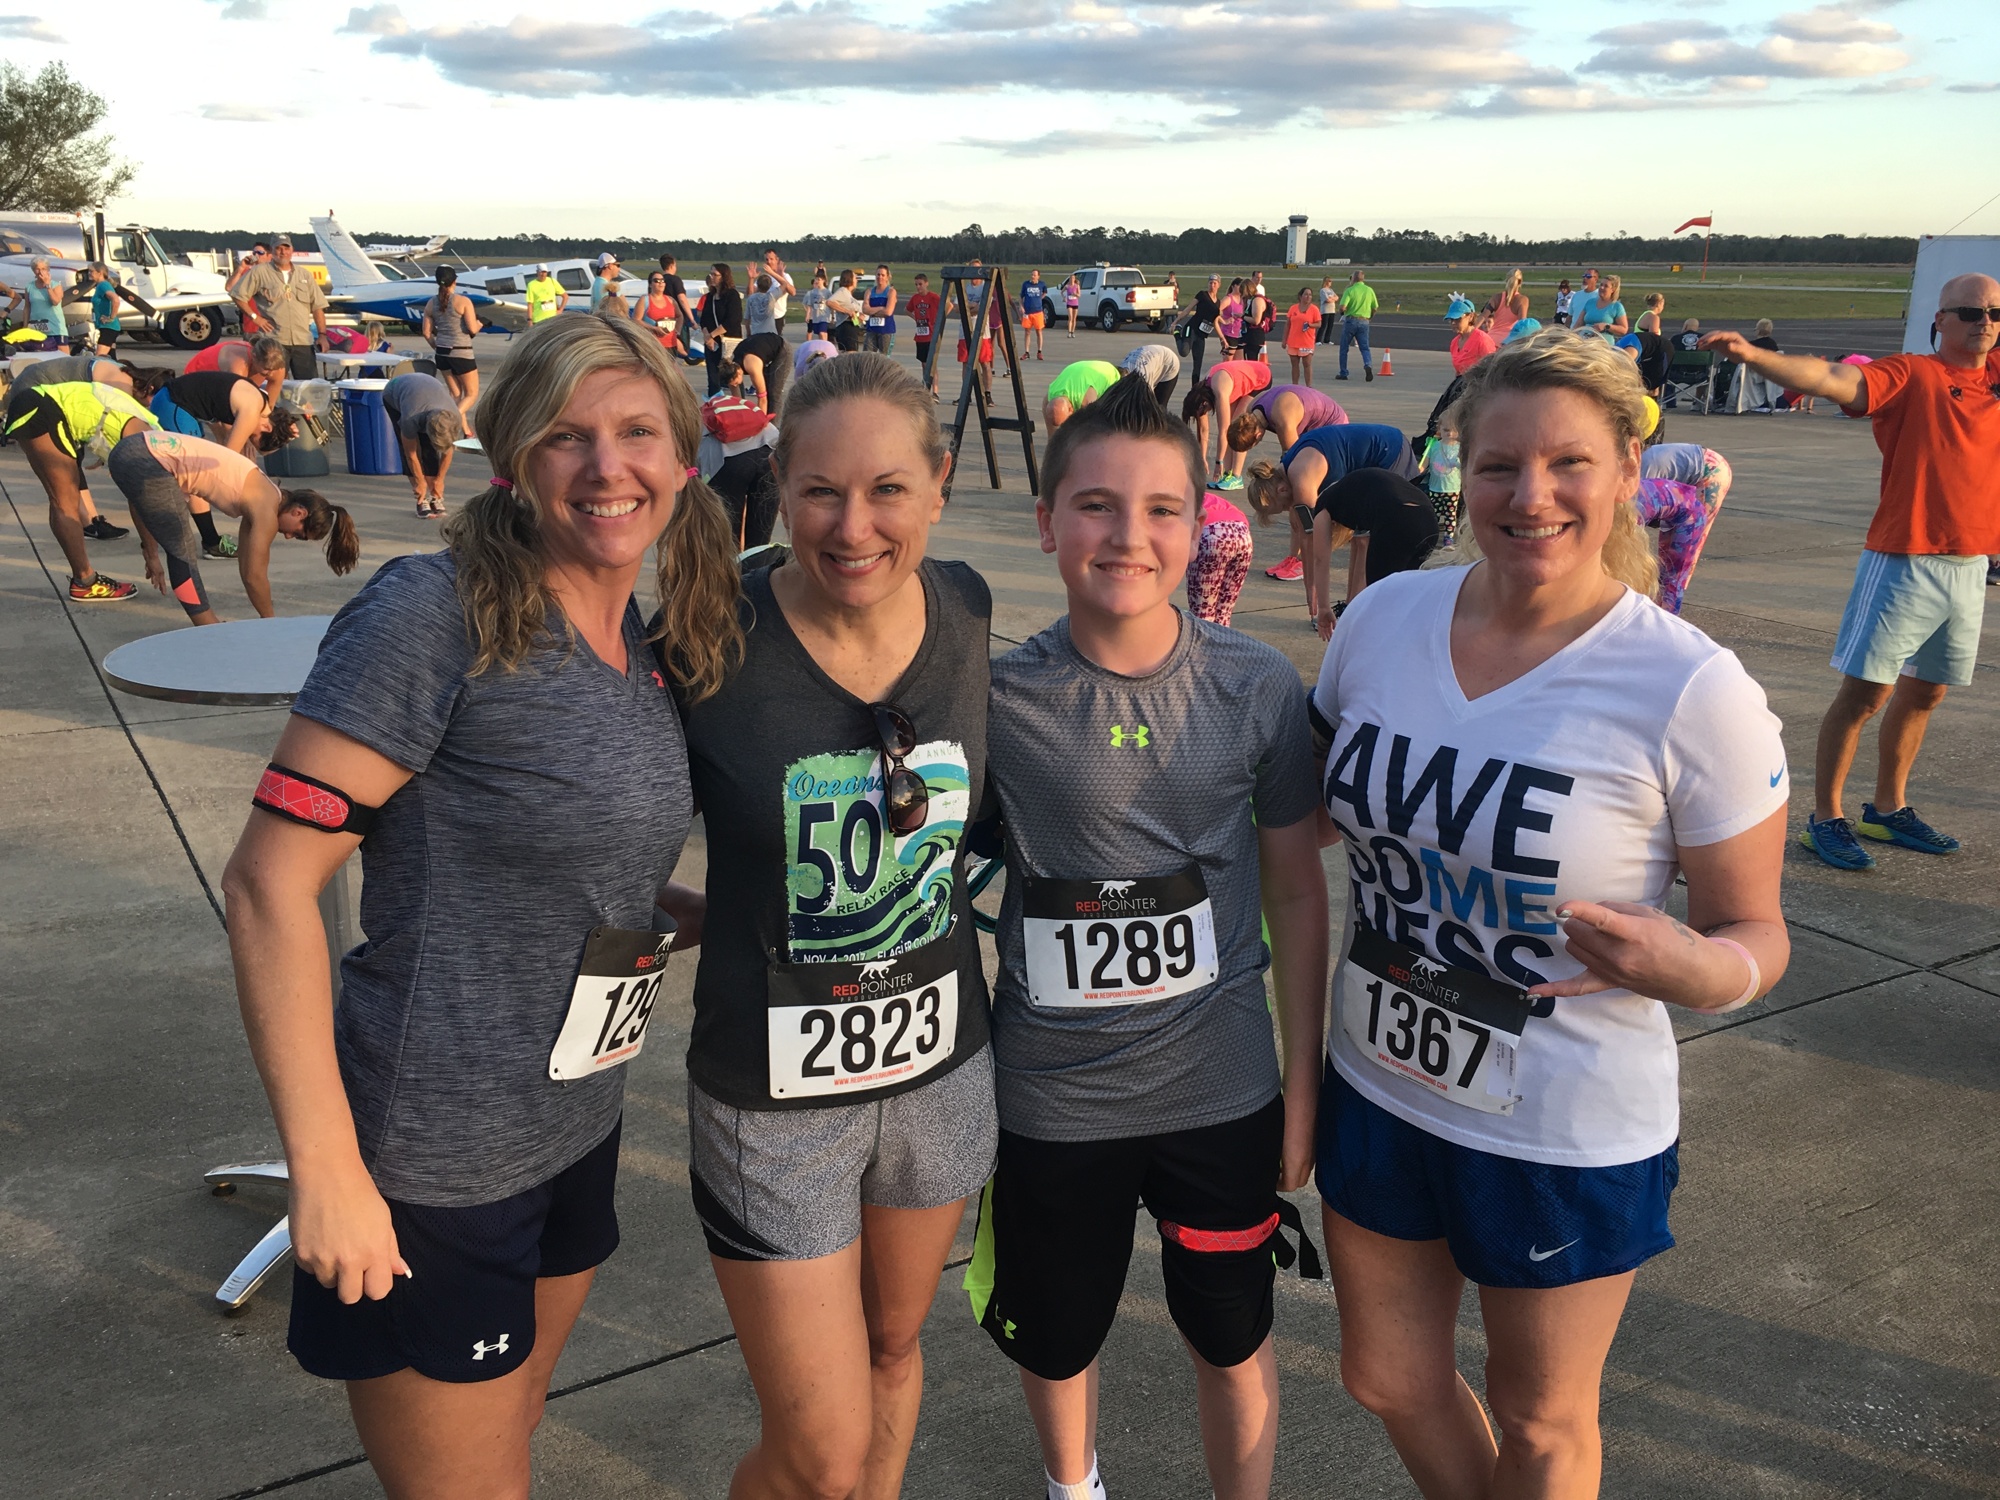 Laura Gilvary, Dr. Jessie Bech, Jack Gilvary and Melissa Johnson Woodburn before Race the Runway. Photo courtesy of Cindy Dalecki